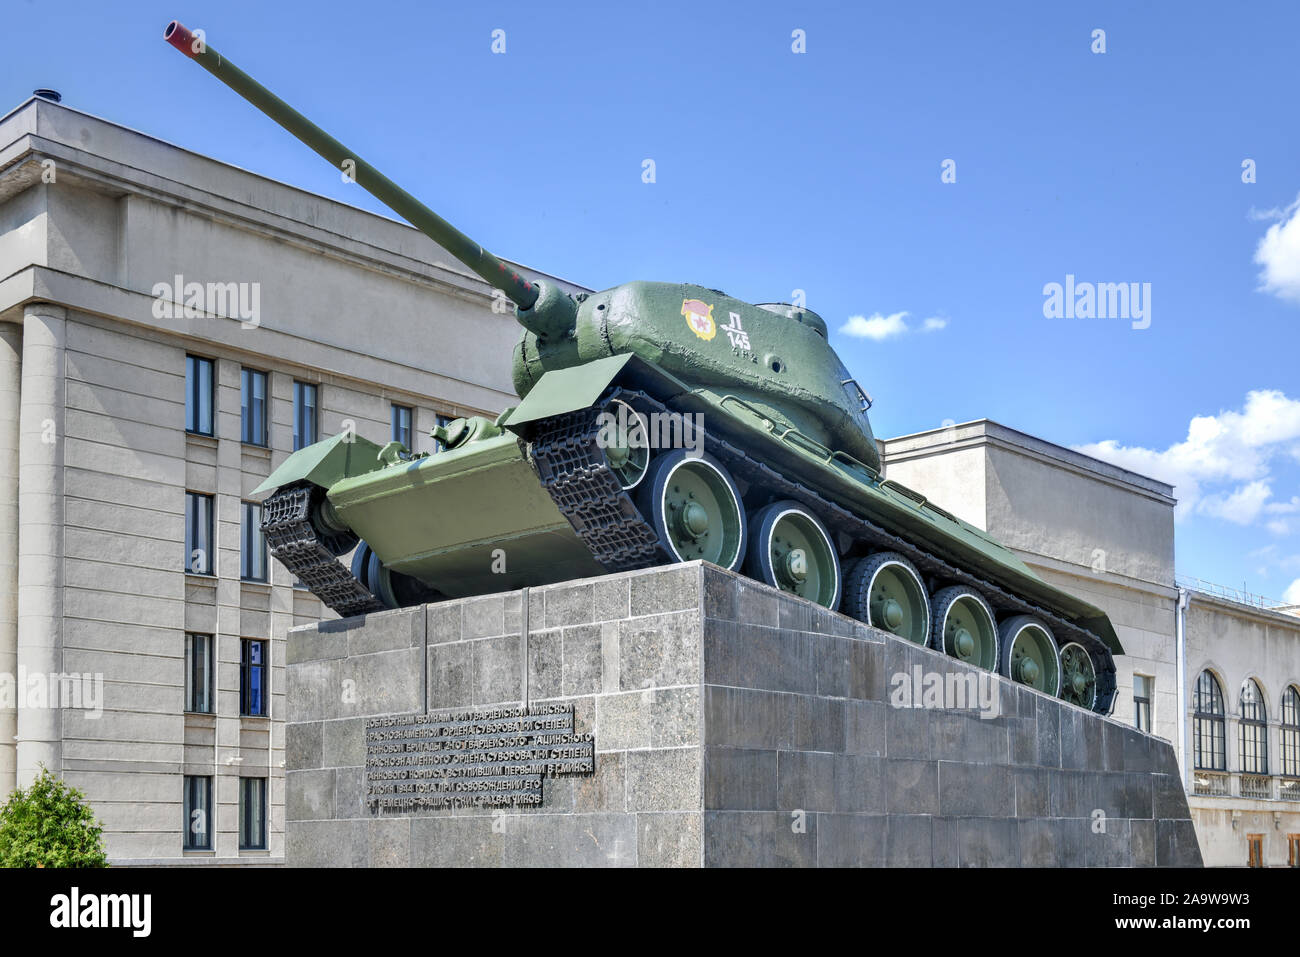 Soviet T-34/85 tank on a pedestal near the Army Headquarters in Minsk, Belarus. Dedicated to the Red Army that liberated the city in WW II. Stock Photo